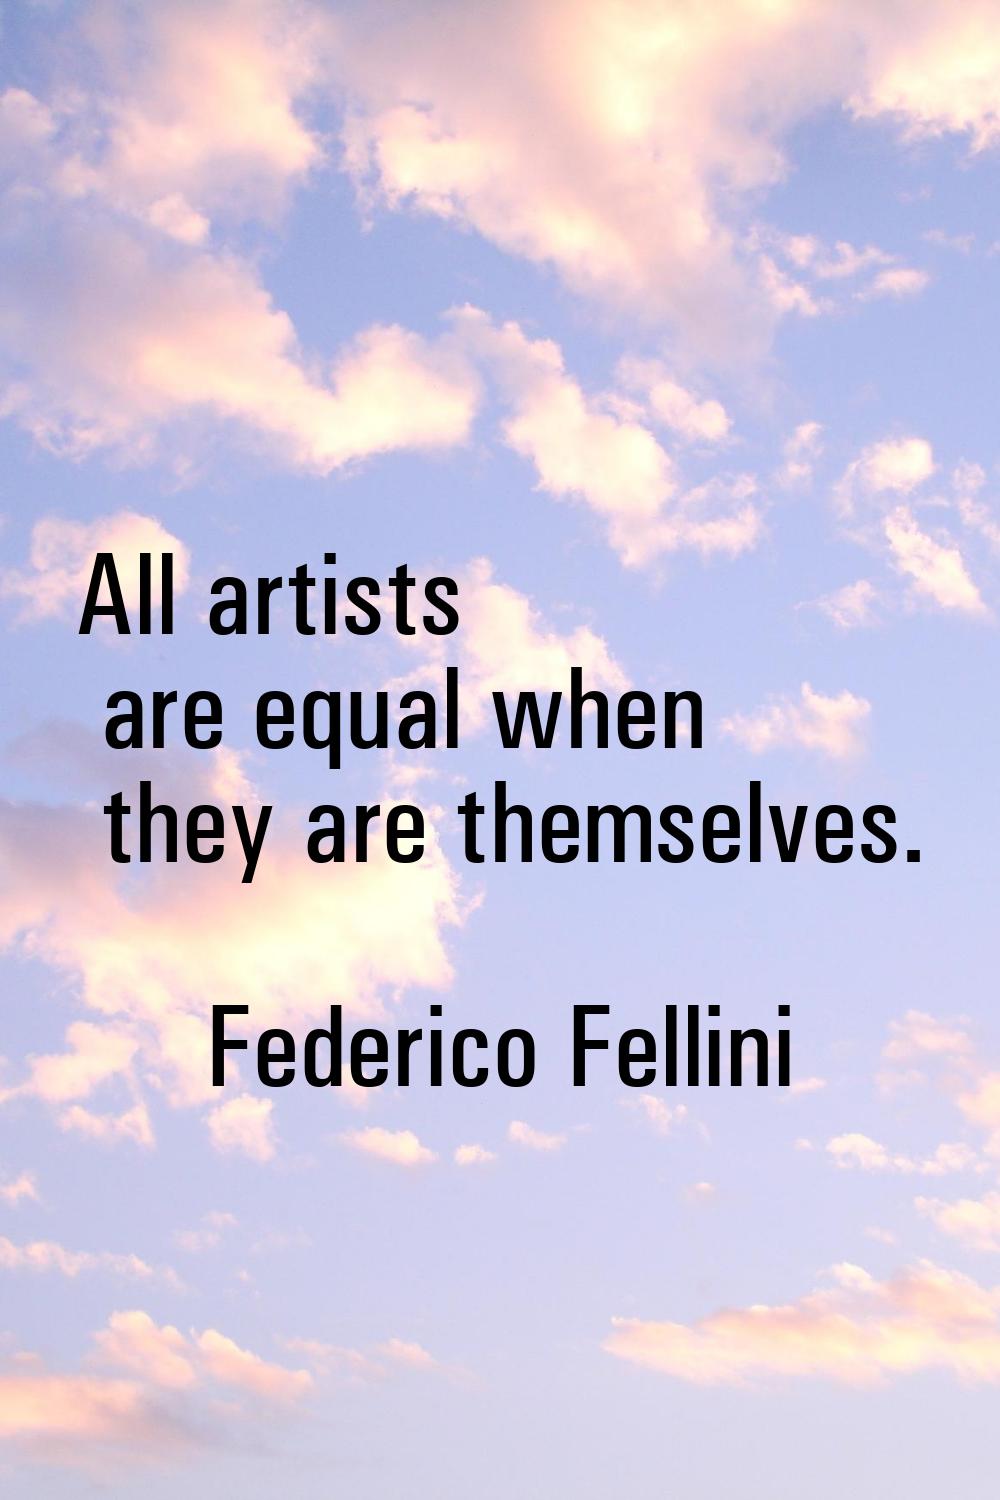 All artists are equal when they are themselves.